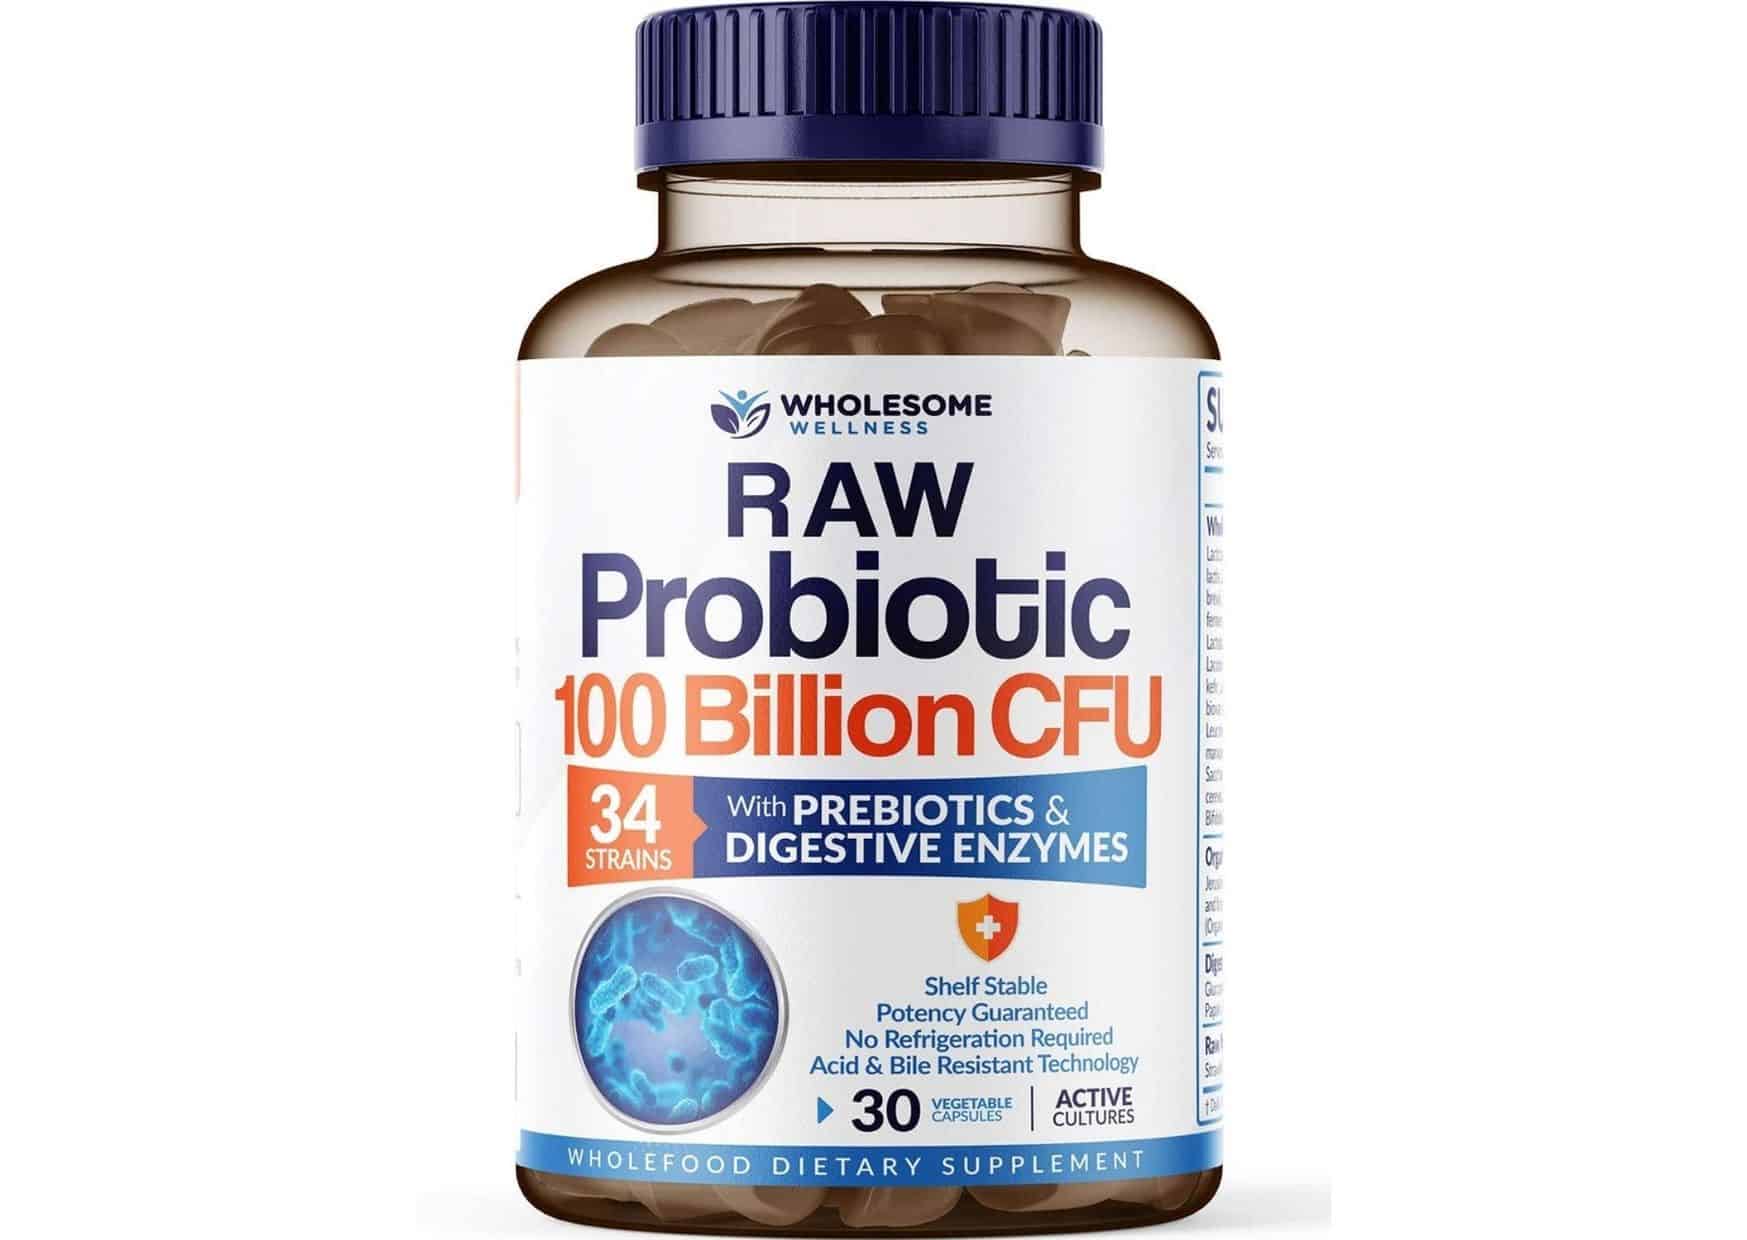 10 Best Probiotics for Women for Urinary and Digestive Support